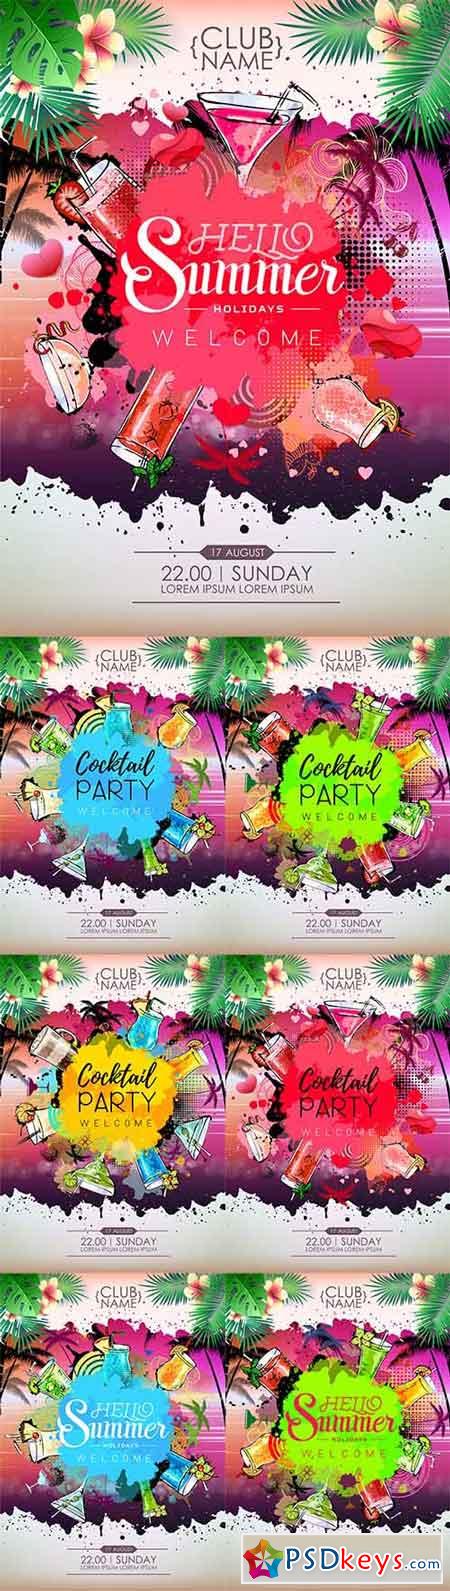 Summer Cocktail party posters design. Cocktail menu